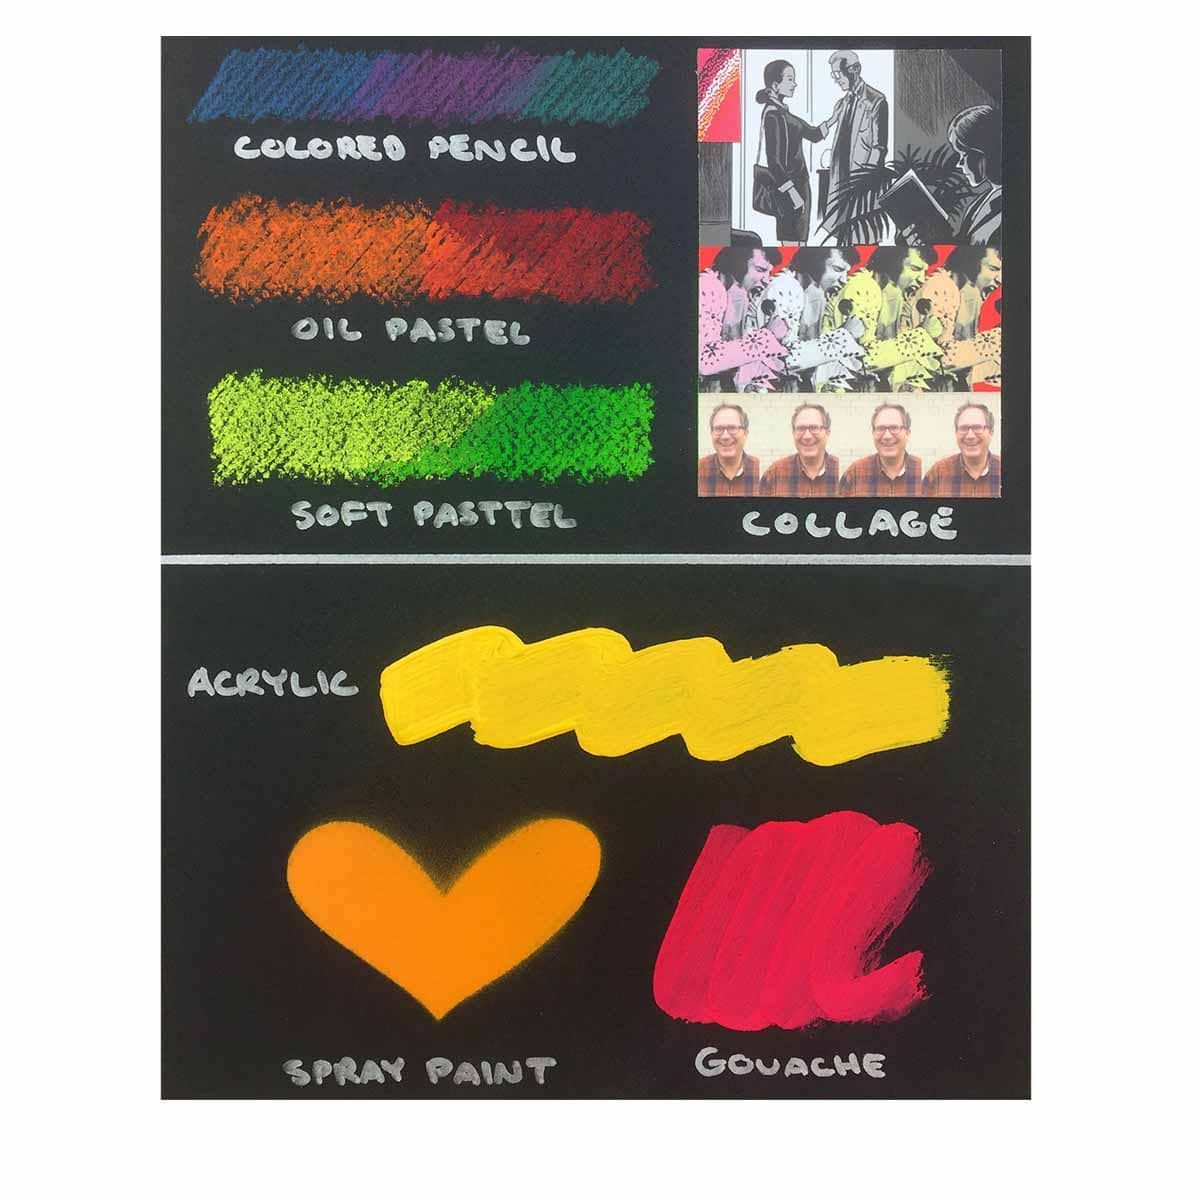 Perfect for pastel, chalk, colored pencil, & acrylic paint applications